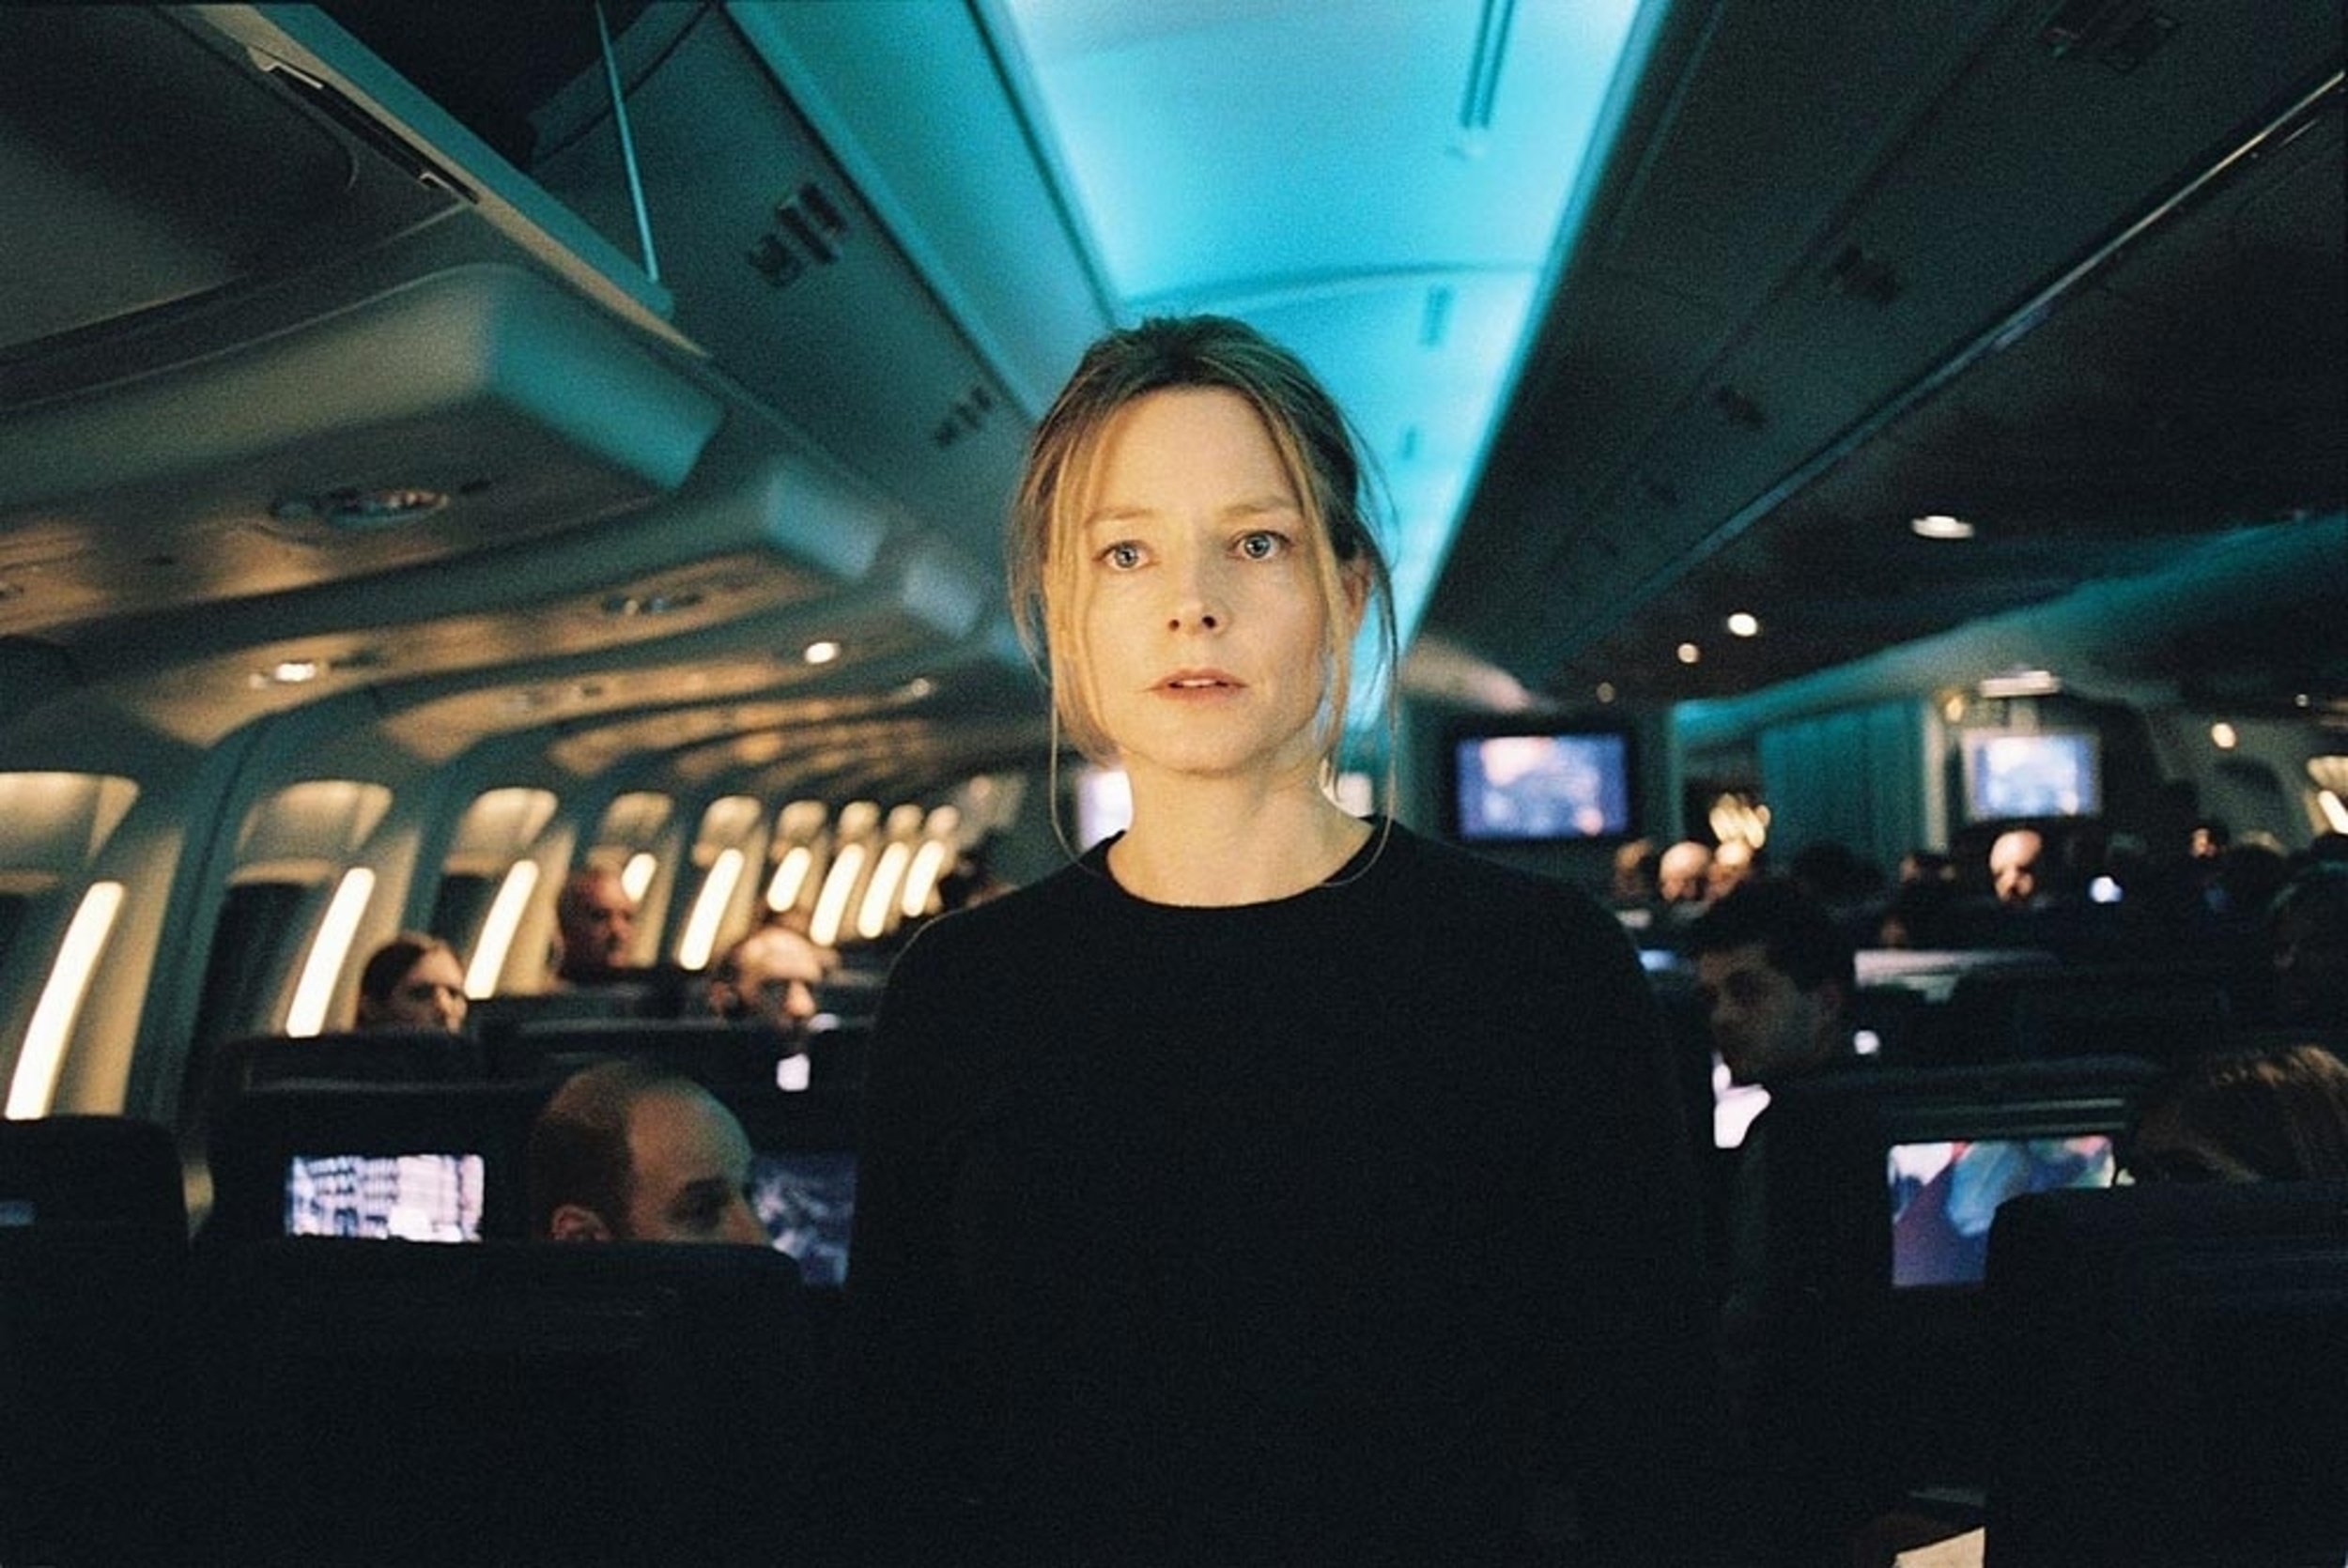 <p>A psychological thriller that dips into the world of horror, “Flightplan” starts Jodie Foster on a plane with her daughter, and then her daughter disappears. All throughout the plane, Foster runs into people who insist her daughter was never on the plane. What’s going on? How could a person disappear entirely on a plane? That’s the crux of “Flightplan.”</p><p><a href='https://www.msn.com/en-us/community/channel/vid-cj9pqbr0vn9in2b6ddcd8sfgpfq6x6utp44fssrv6mc2gtybw0us'>Follow us on MSN to see more of our exclusive entertainment content.</a></p>